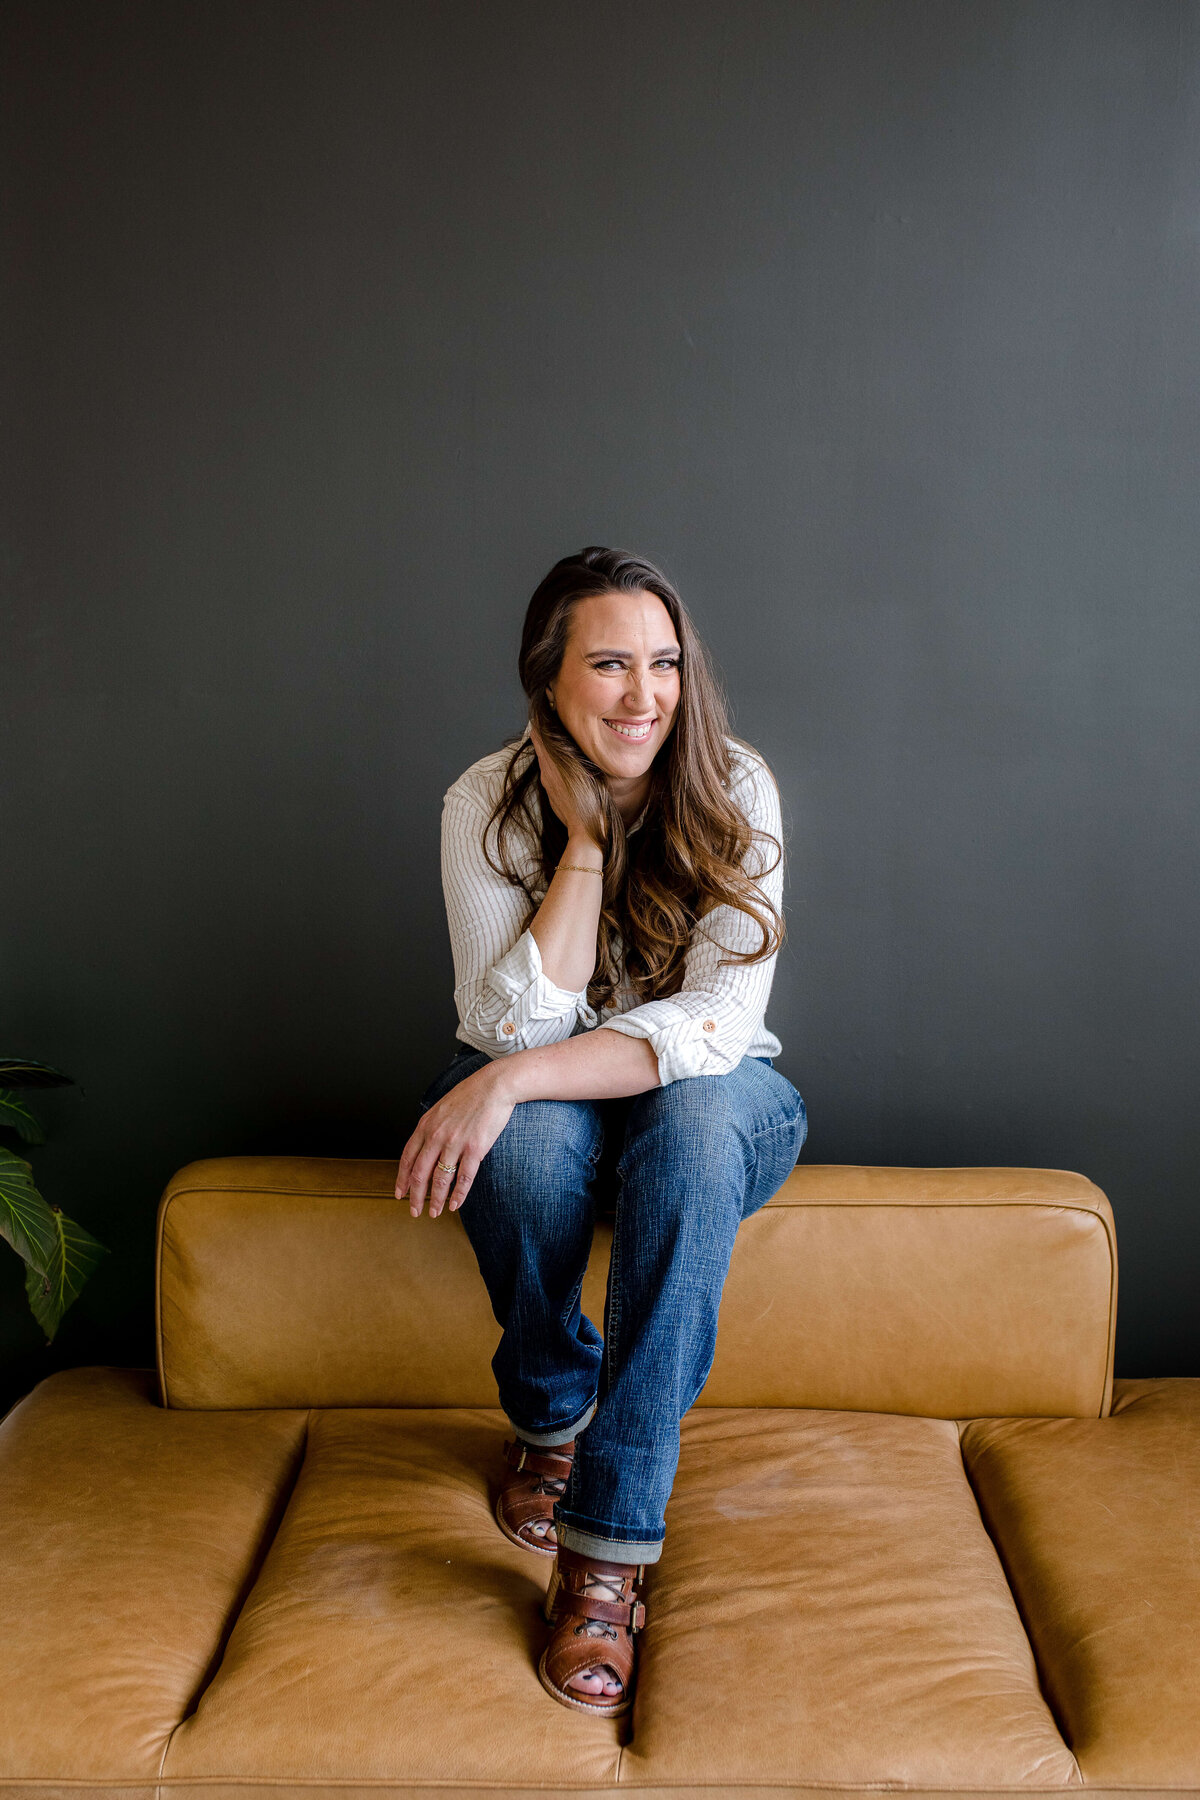 commercial photographers captures brand photography for small business owner sitting on a brown leather couch posing as she sits on the back of the couch with a black wall behind her